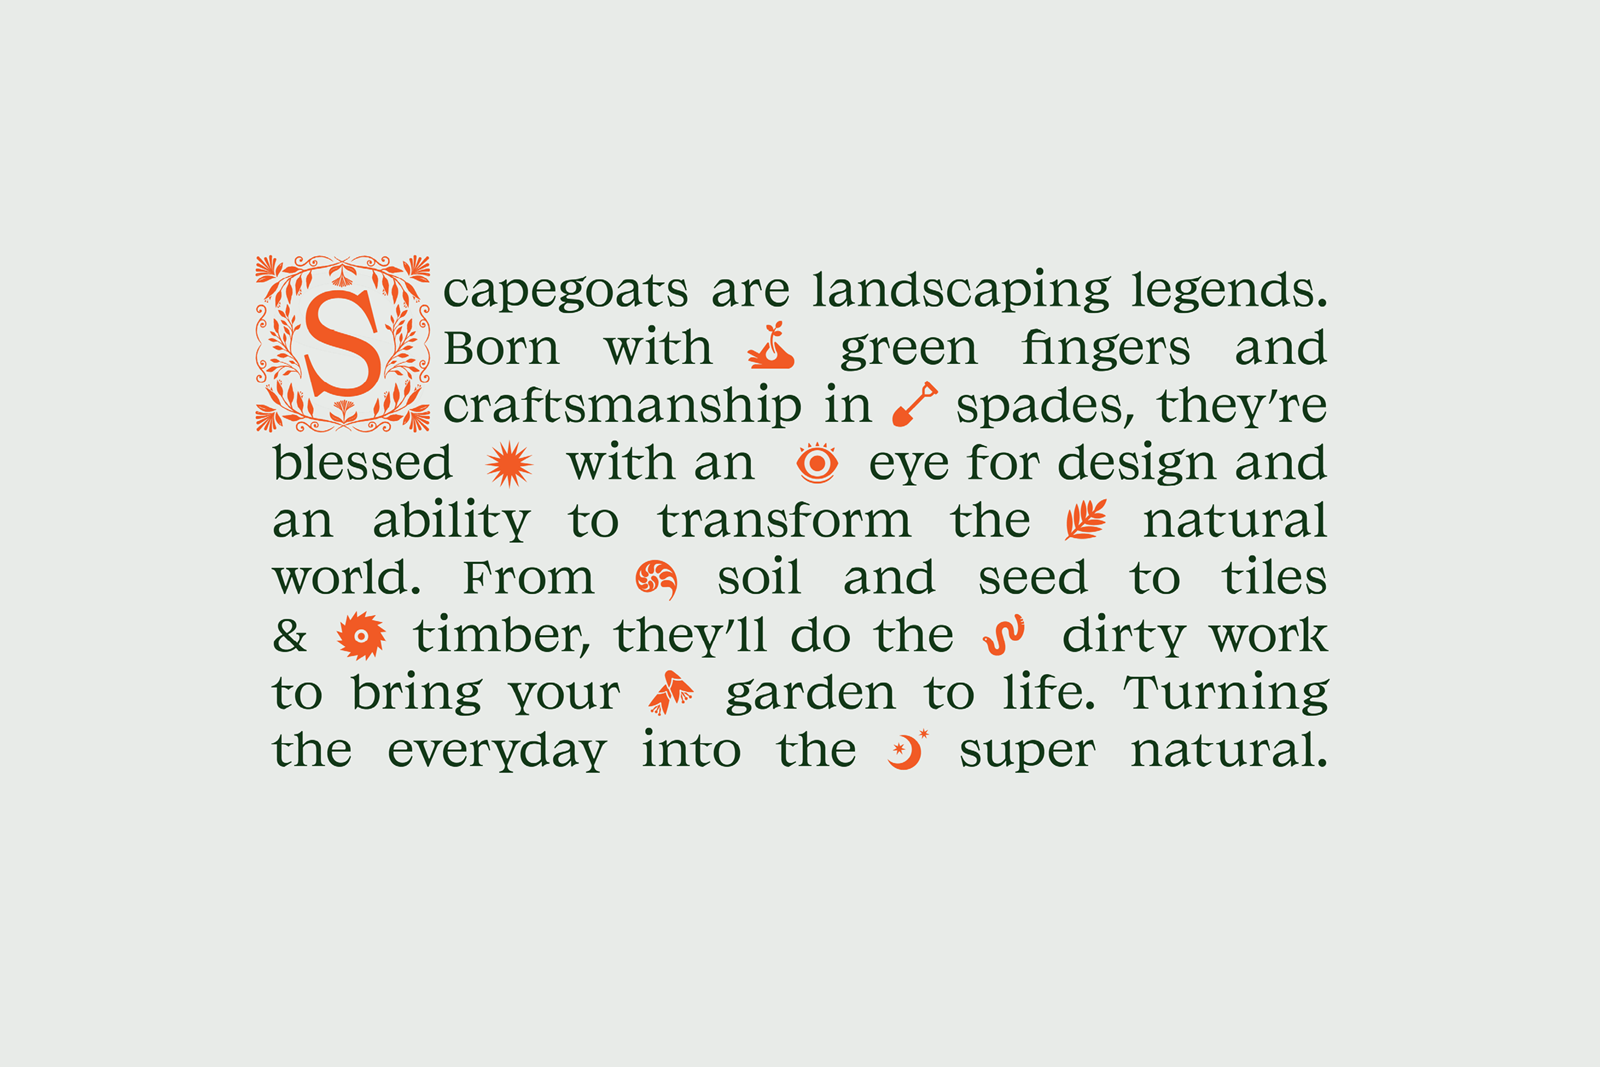 Logo, illustration, copywriting and web design by Strategy for Wellington-based landscaping company Scapegoats